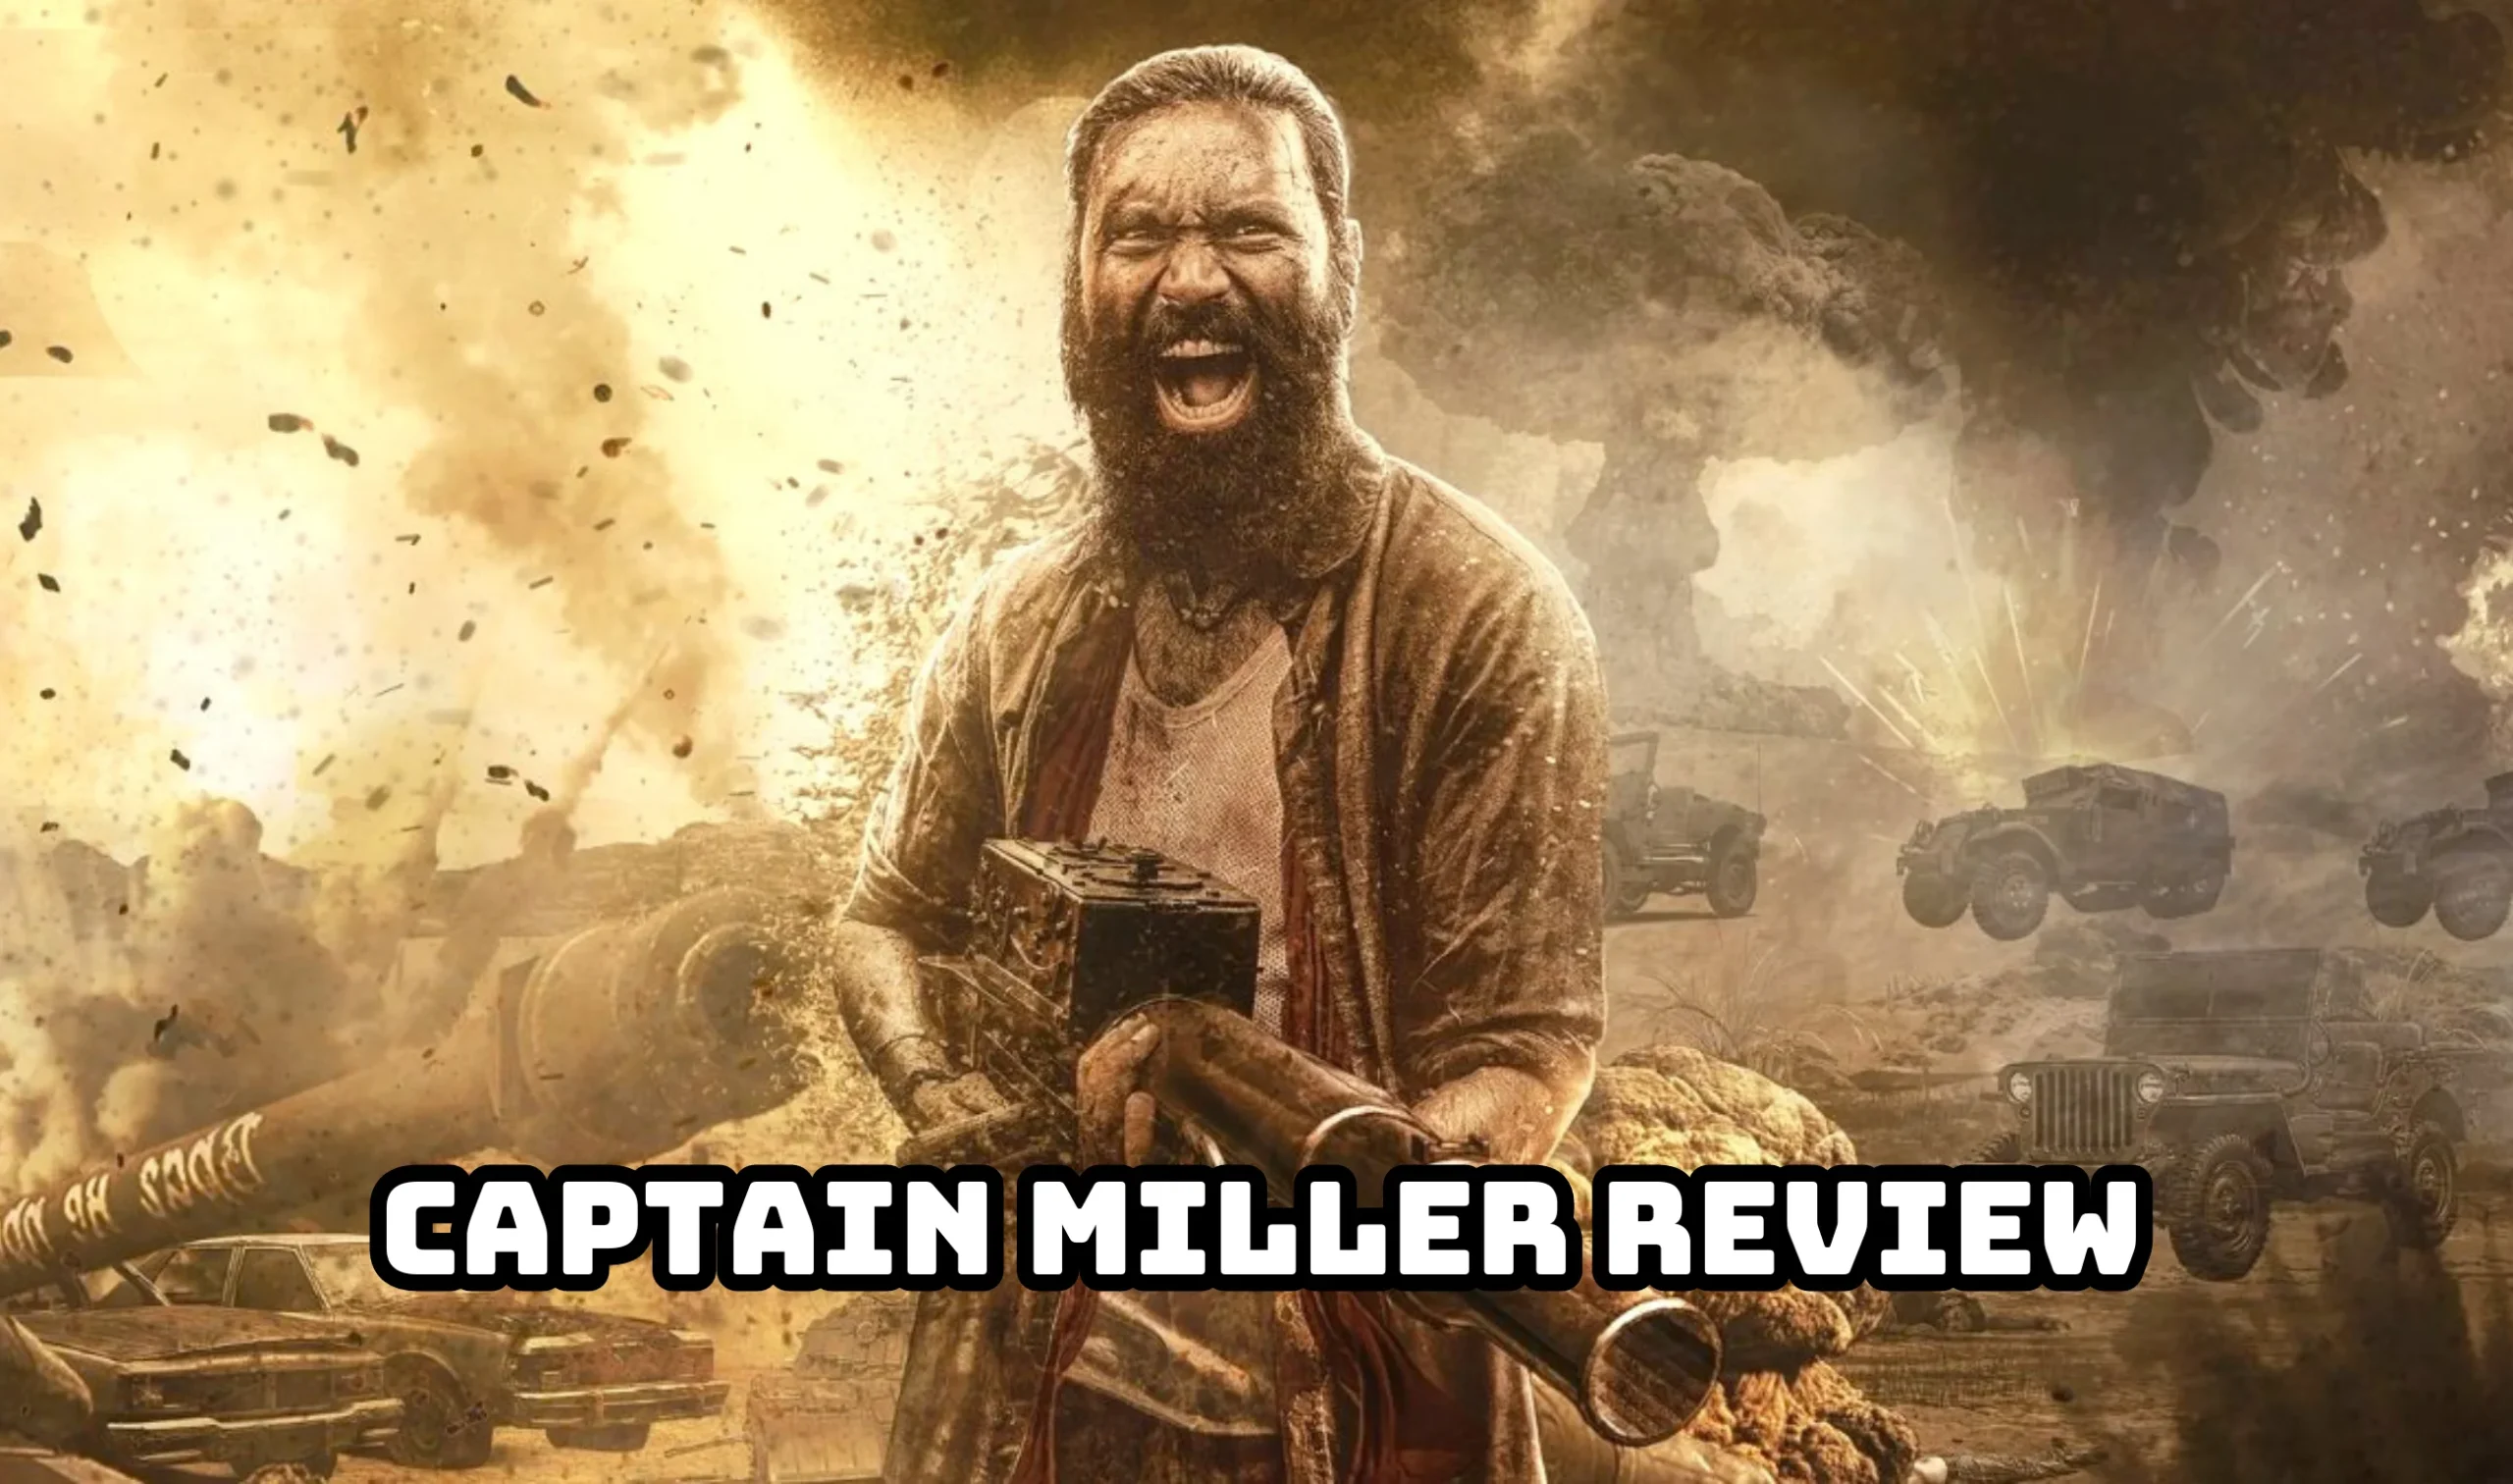 Captain Miller Review: Only Action Too Much Action